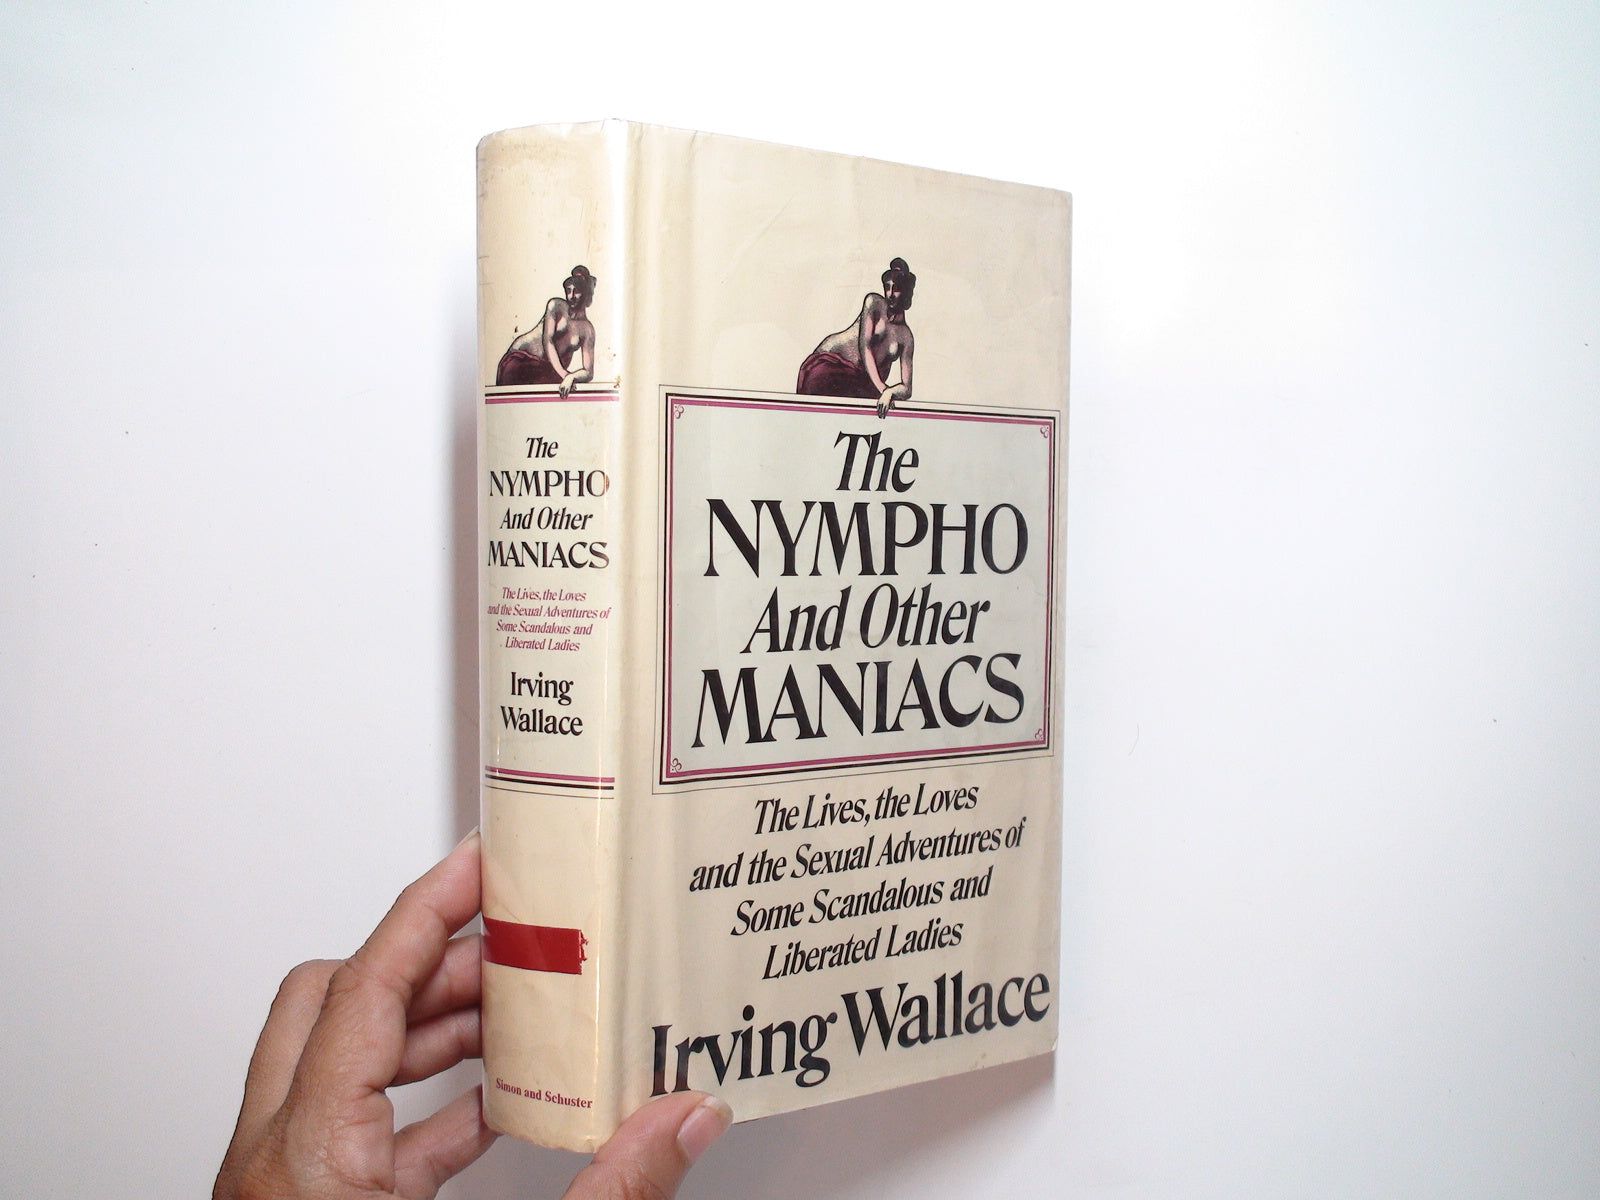 The Nympho and Other Maniacs, Irving Wallace, Illustrated, 1st Ed, 1971